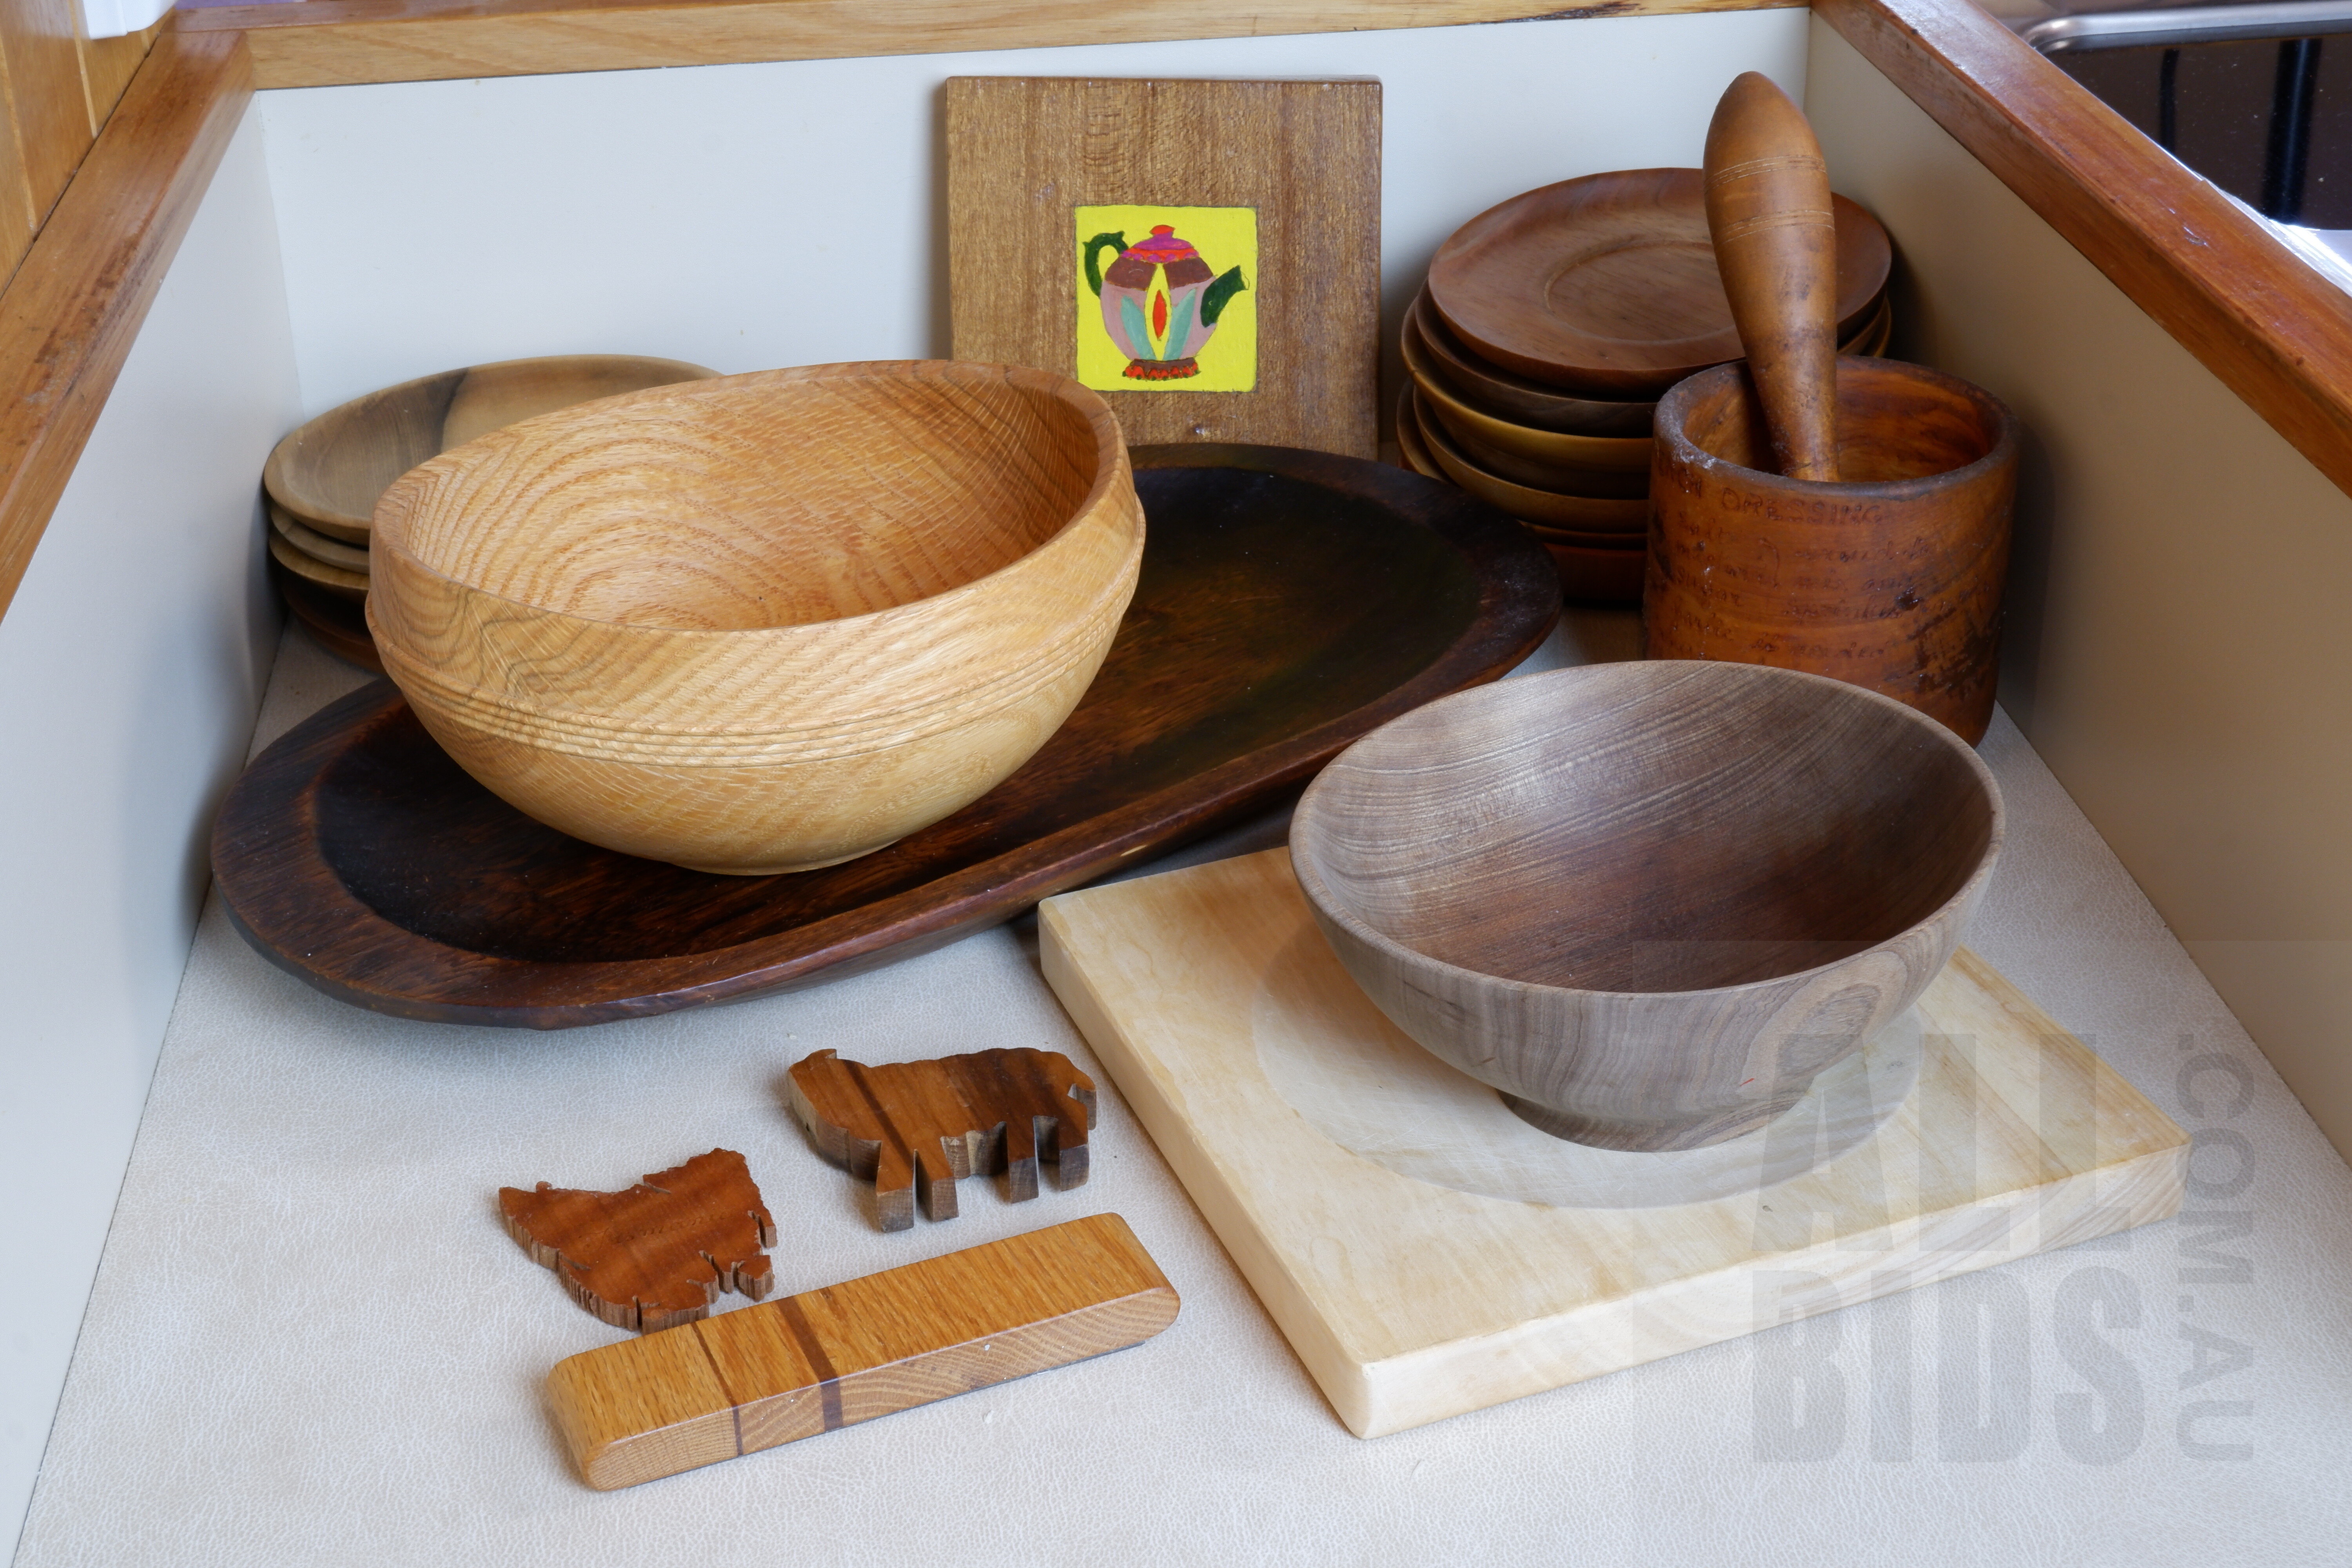 'Collection of Bespoke Timber Bowls and Serving Ware, Including Coachwood, Pin Oak, Sassafras and More'